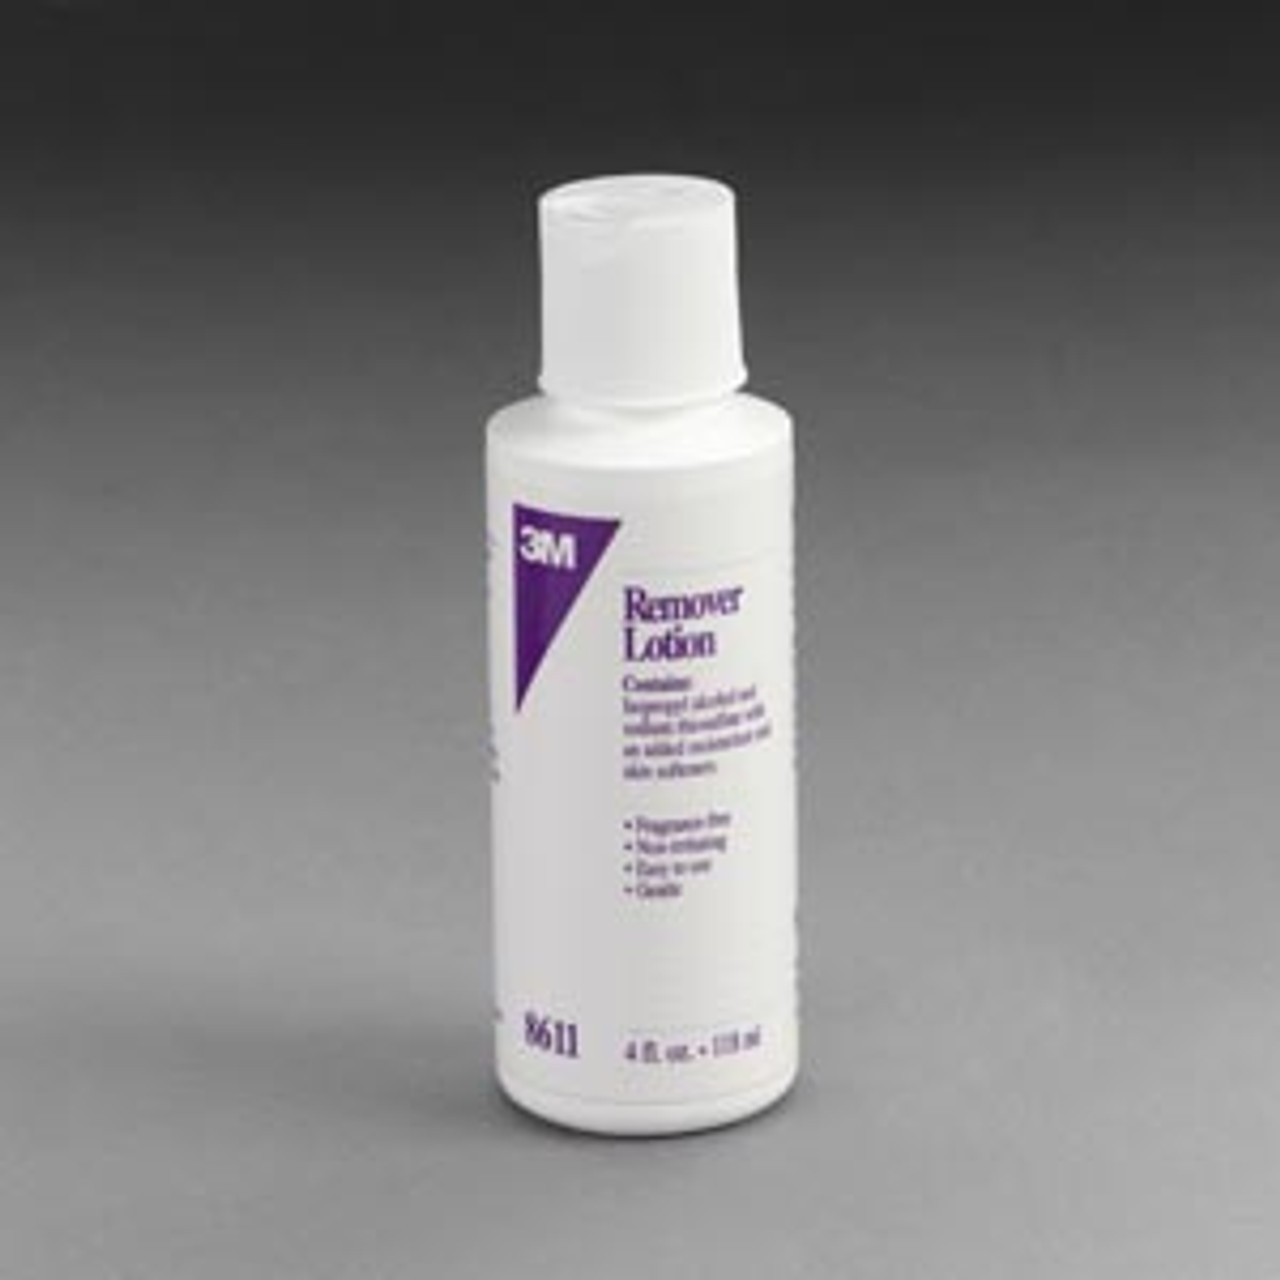 3M REMOVER LOTION, 8611